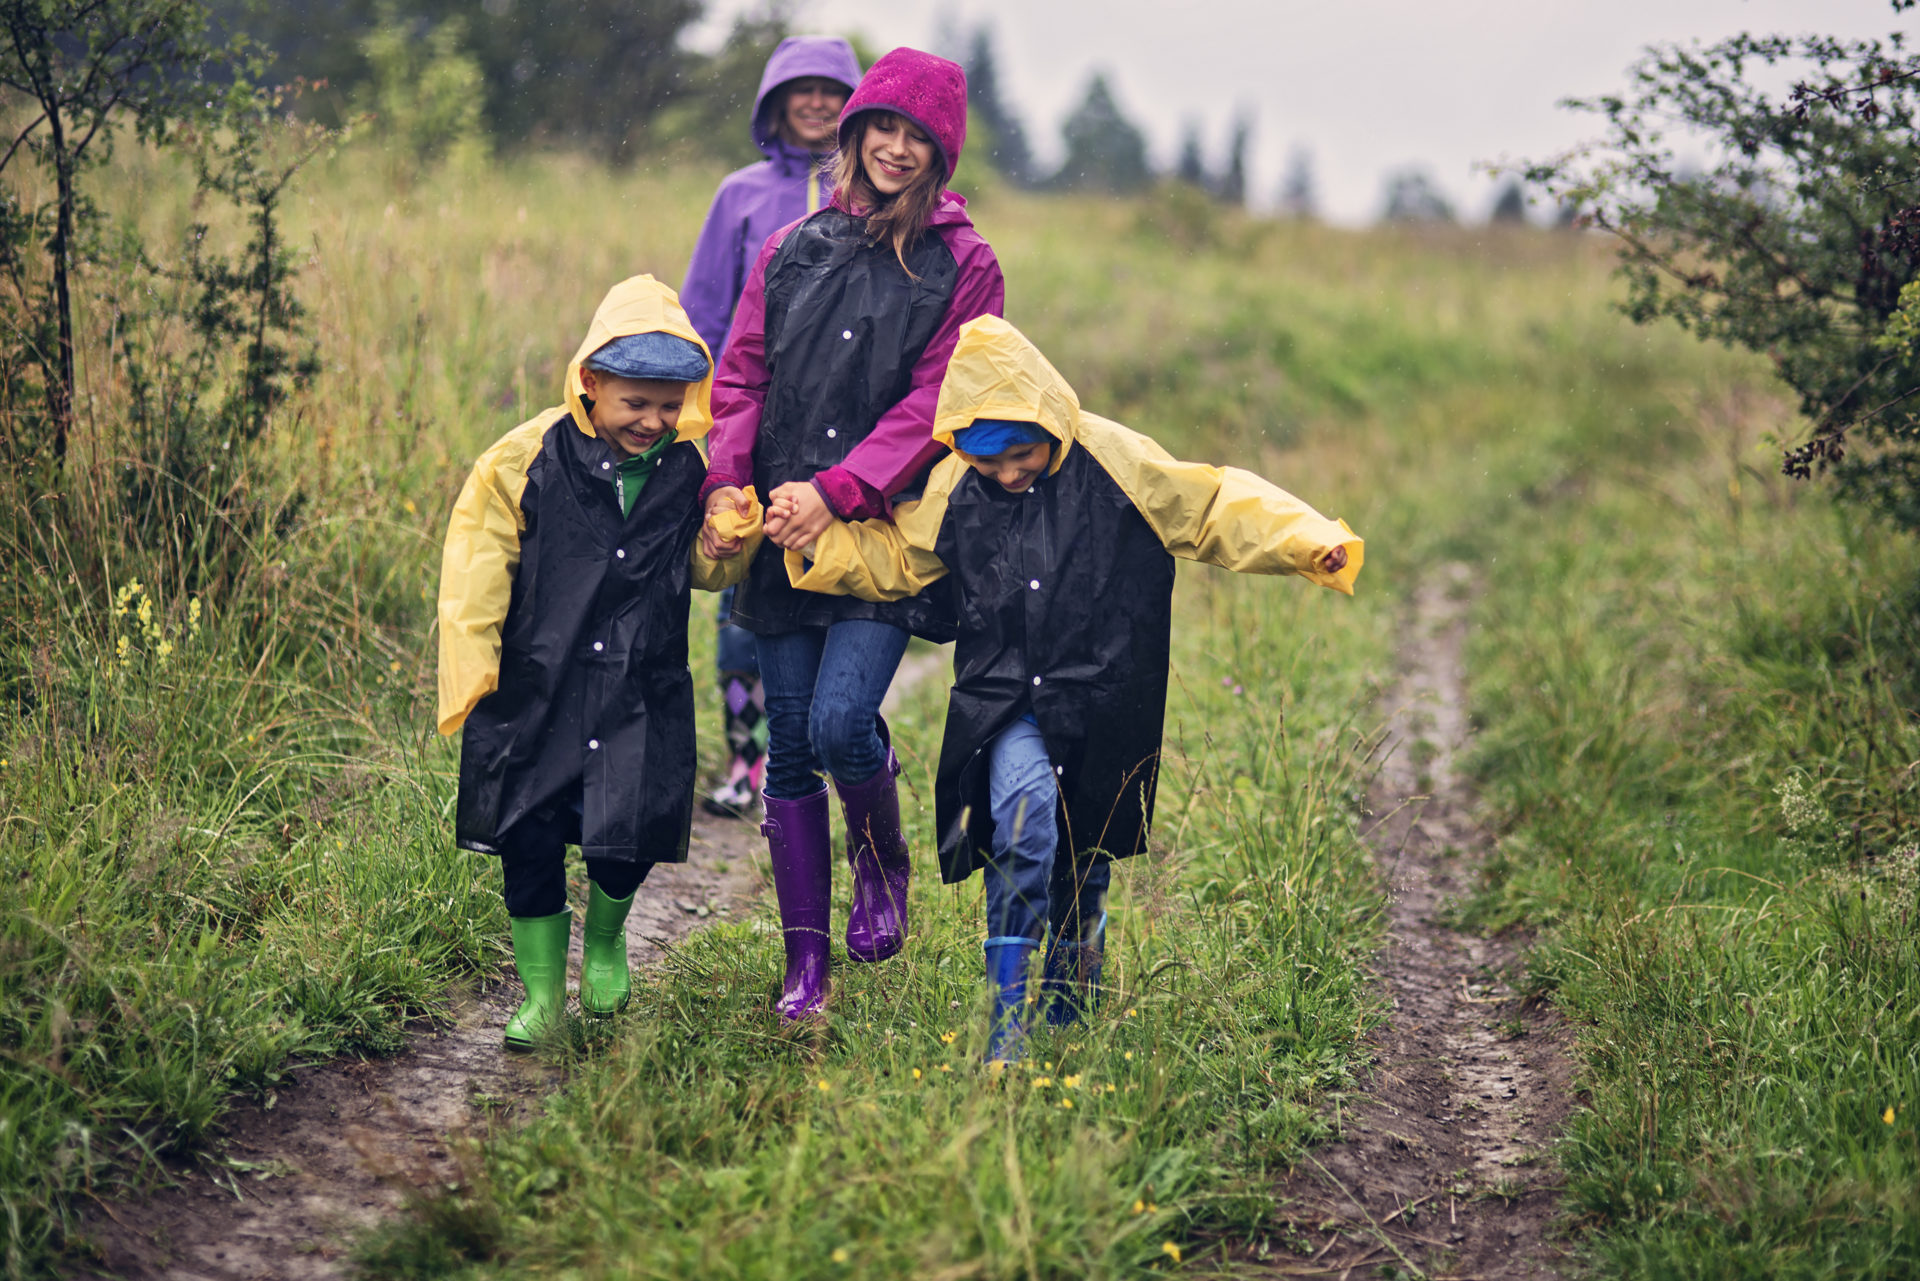 Family wearing raincoats and windproof jackets is hiking on dirt path in nature.